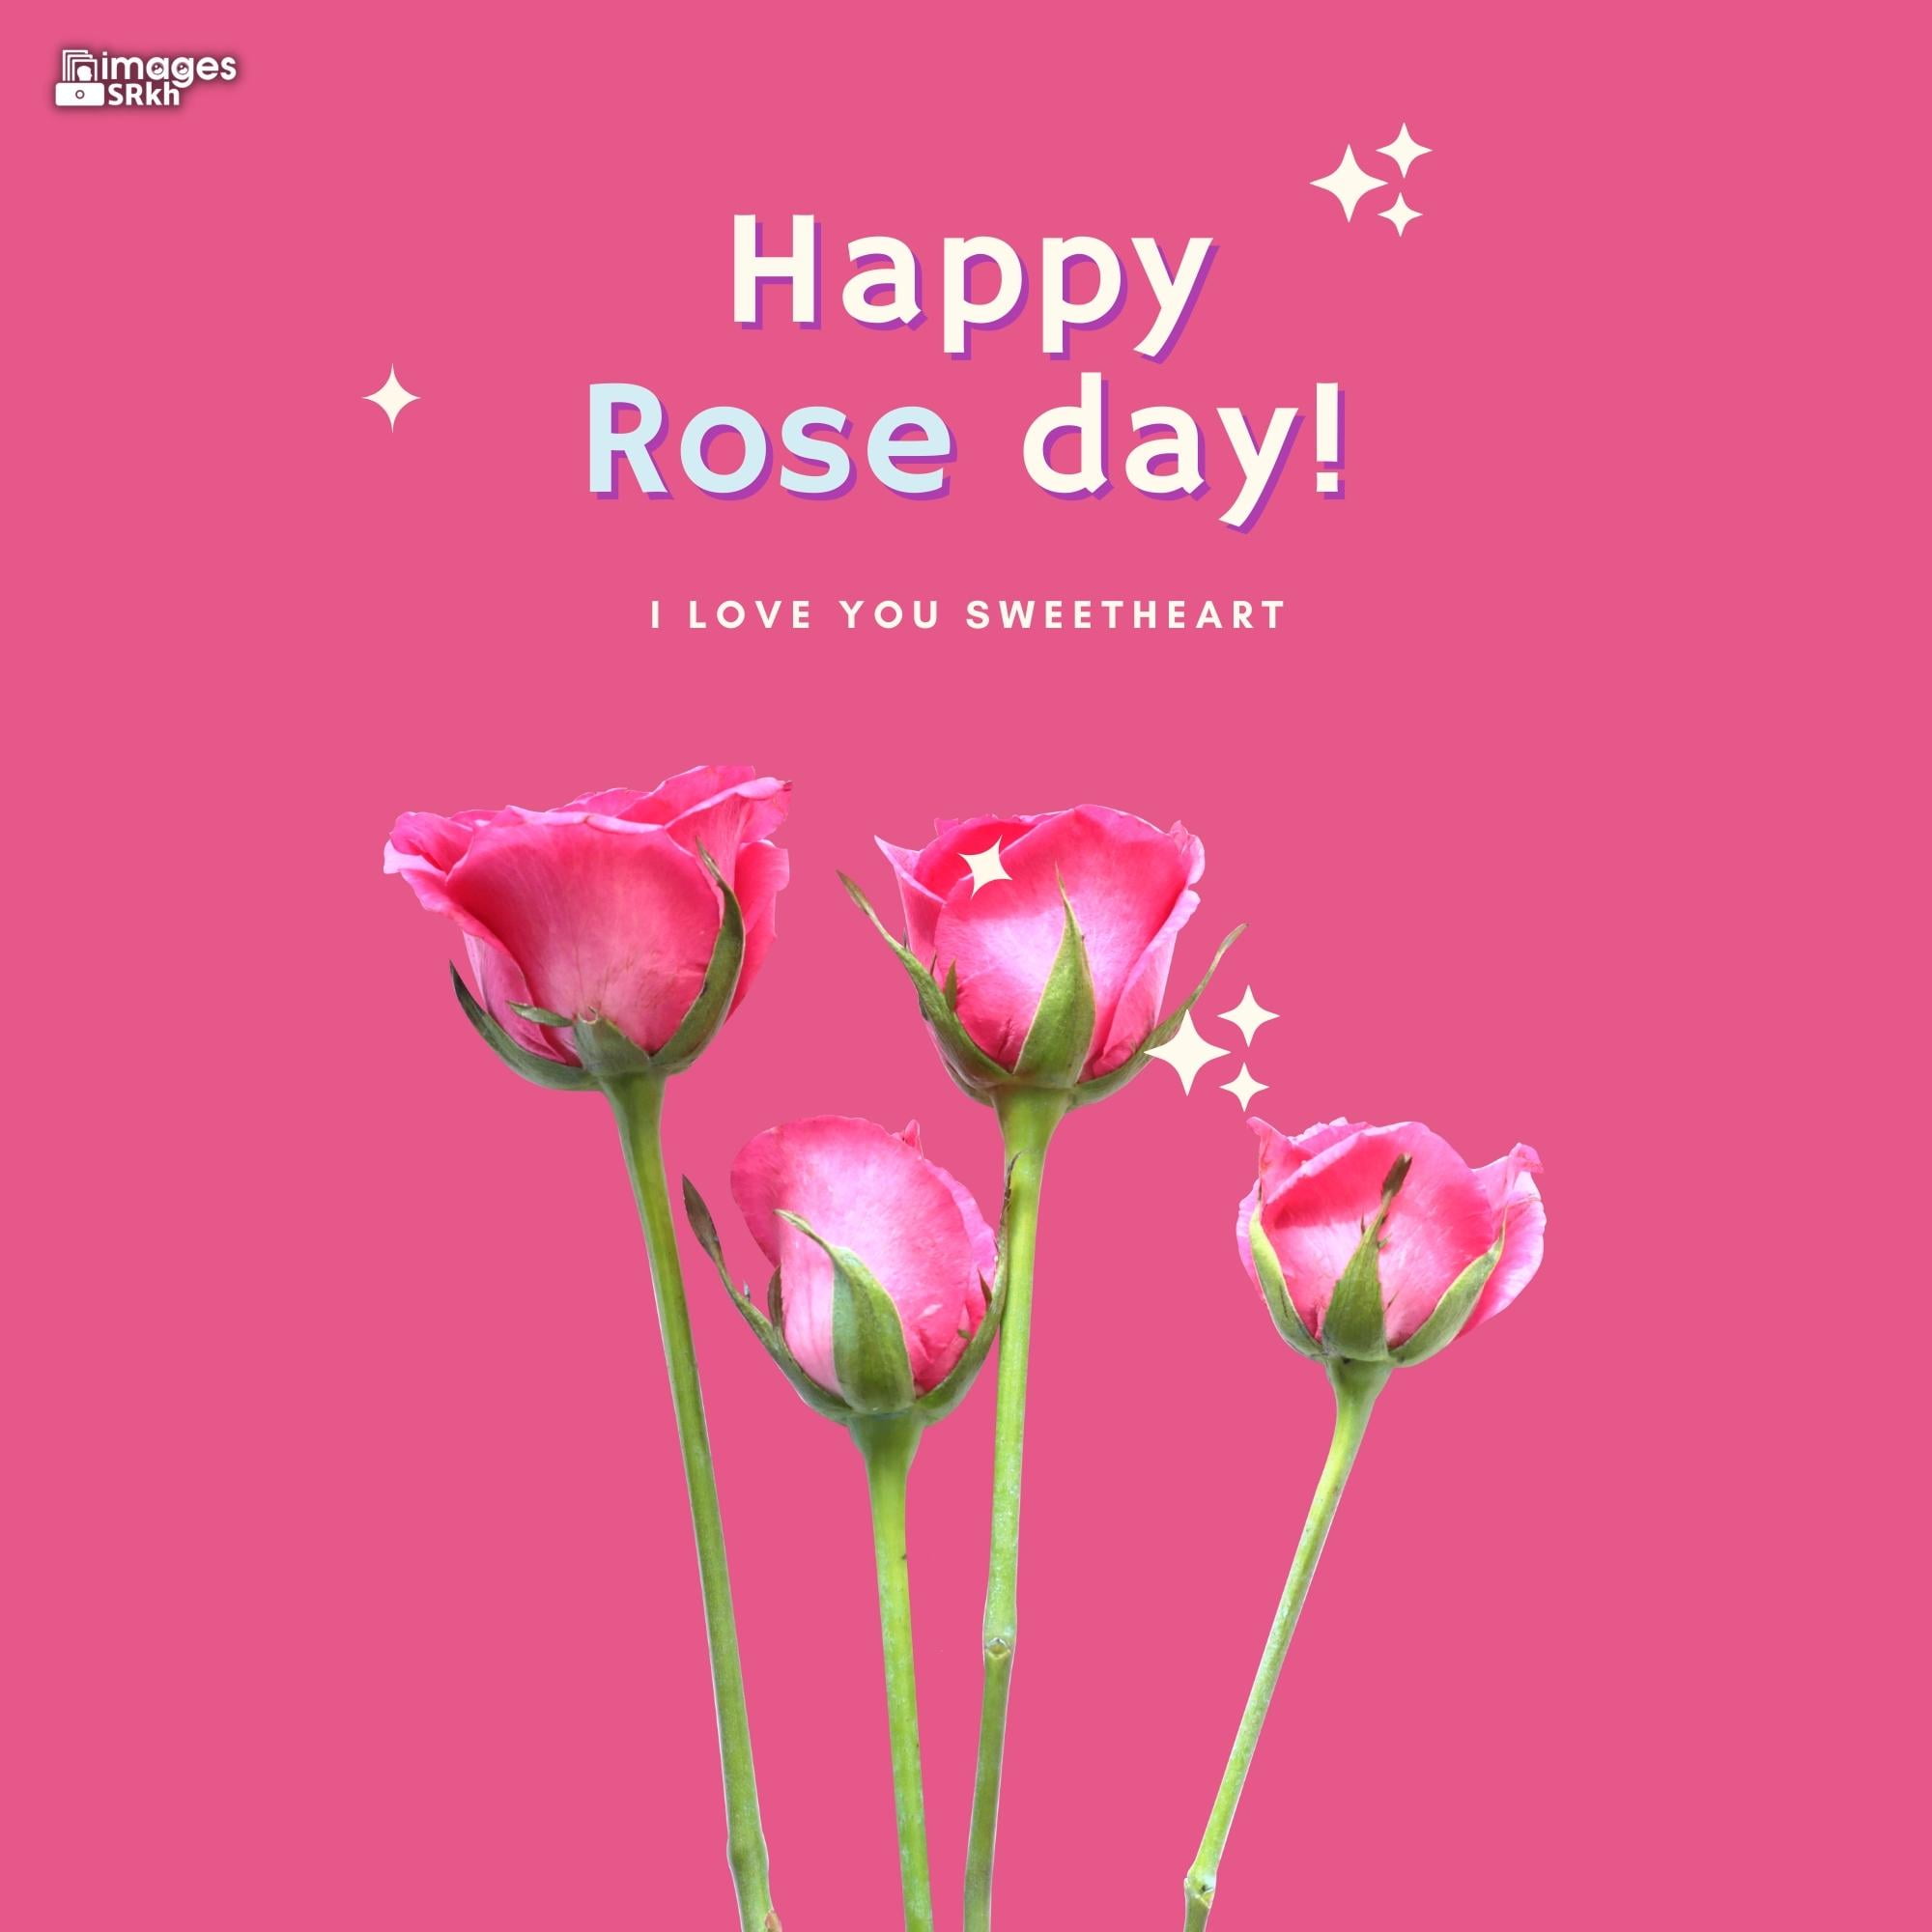 Happy Rose Day Image Hd Download (75)